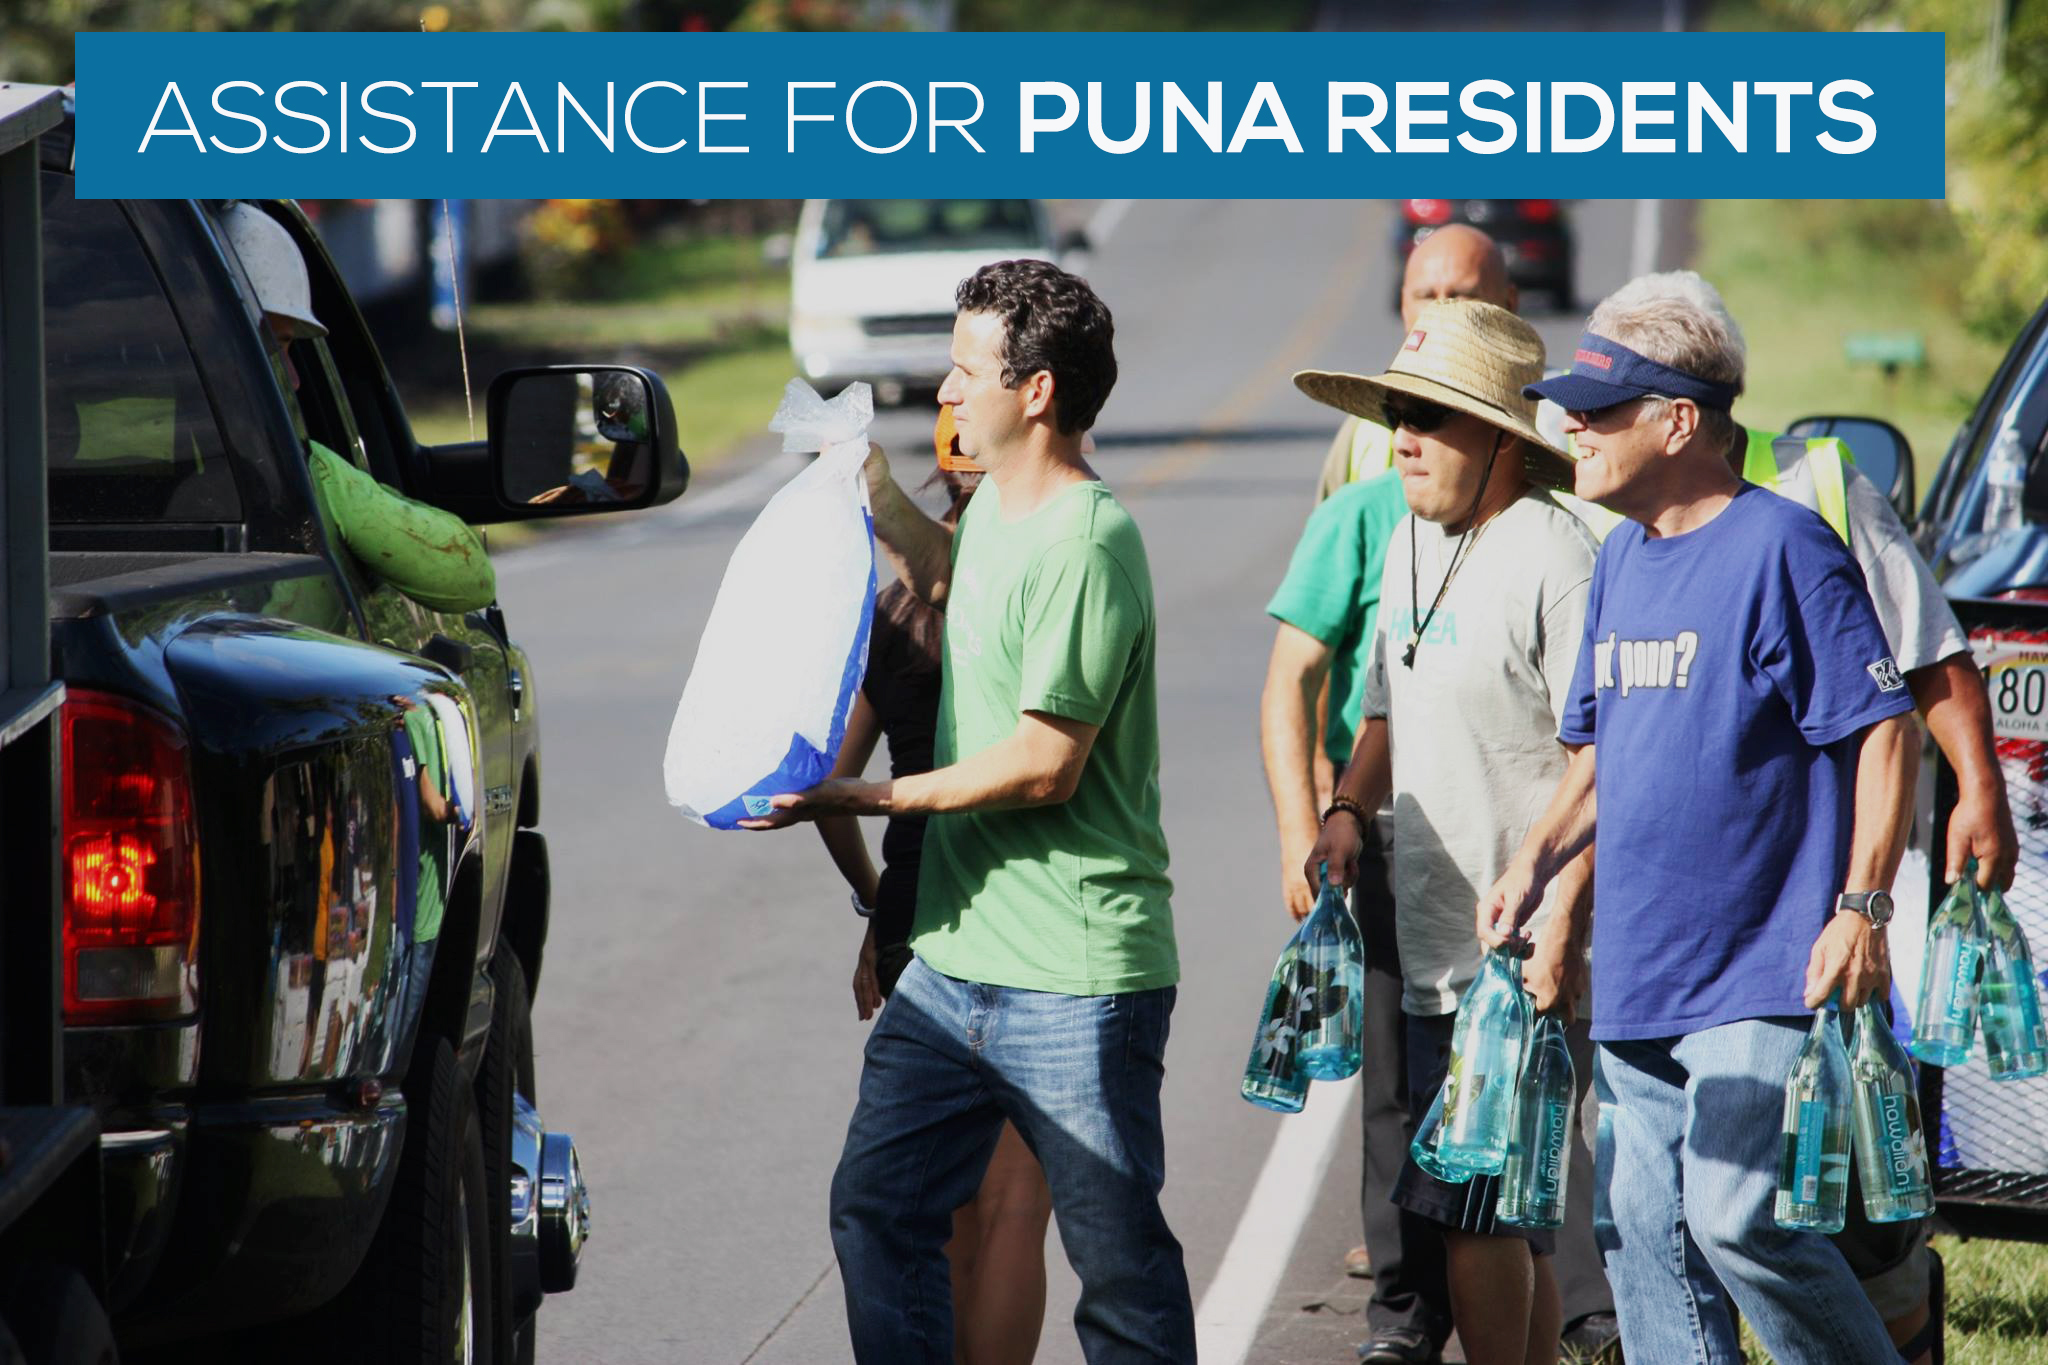 Federal Agency Help for Puna Residents